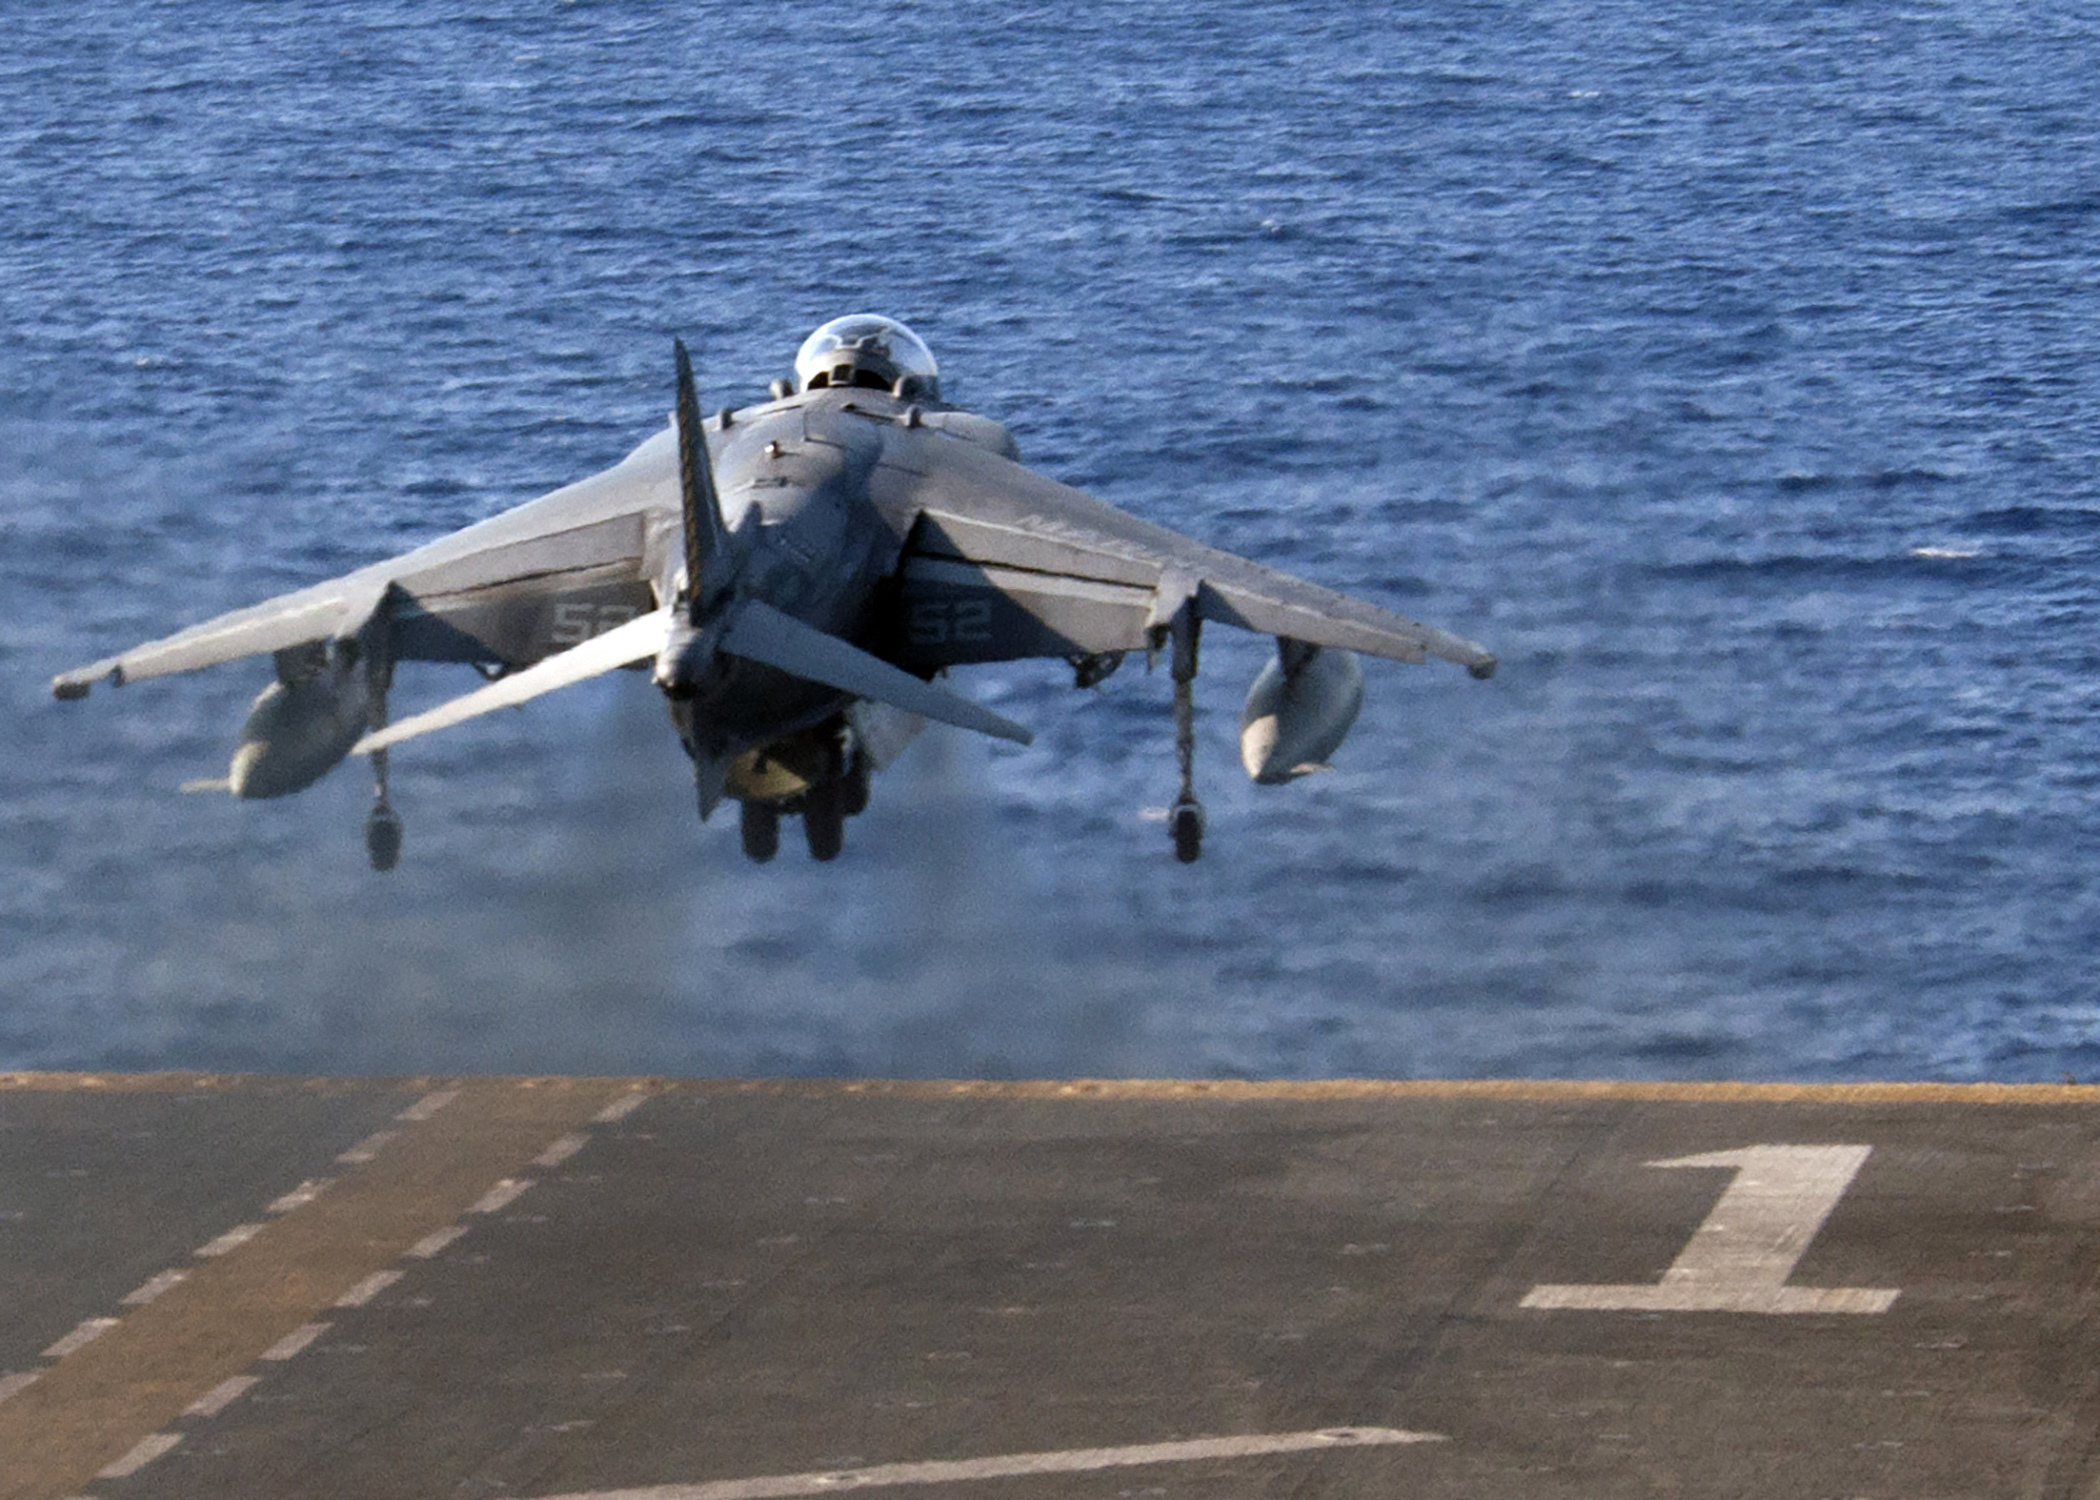 An AV-8B Harrier assigned to the 22nd Marine Expeditionary Unit takes off from the flight deck of the amphibious assault ship USS Wasp in the Mediterranean Sea, Aug. 10, 2016. The 22nd MEU, embarked on Wasp, is conducting precision air strikes in support of the Libyan Government of National Accord-aligned forces against ISIL targets in Sirte, Libya, as part of Operation Odyssey Lightning. Navy photo by Petty Officer 3rd Class Rawad Madanat -